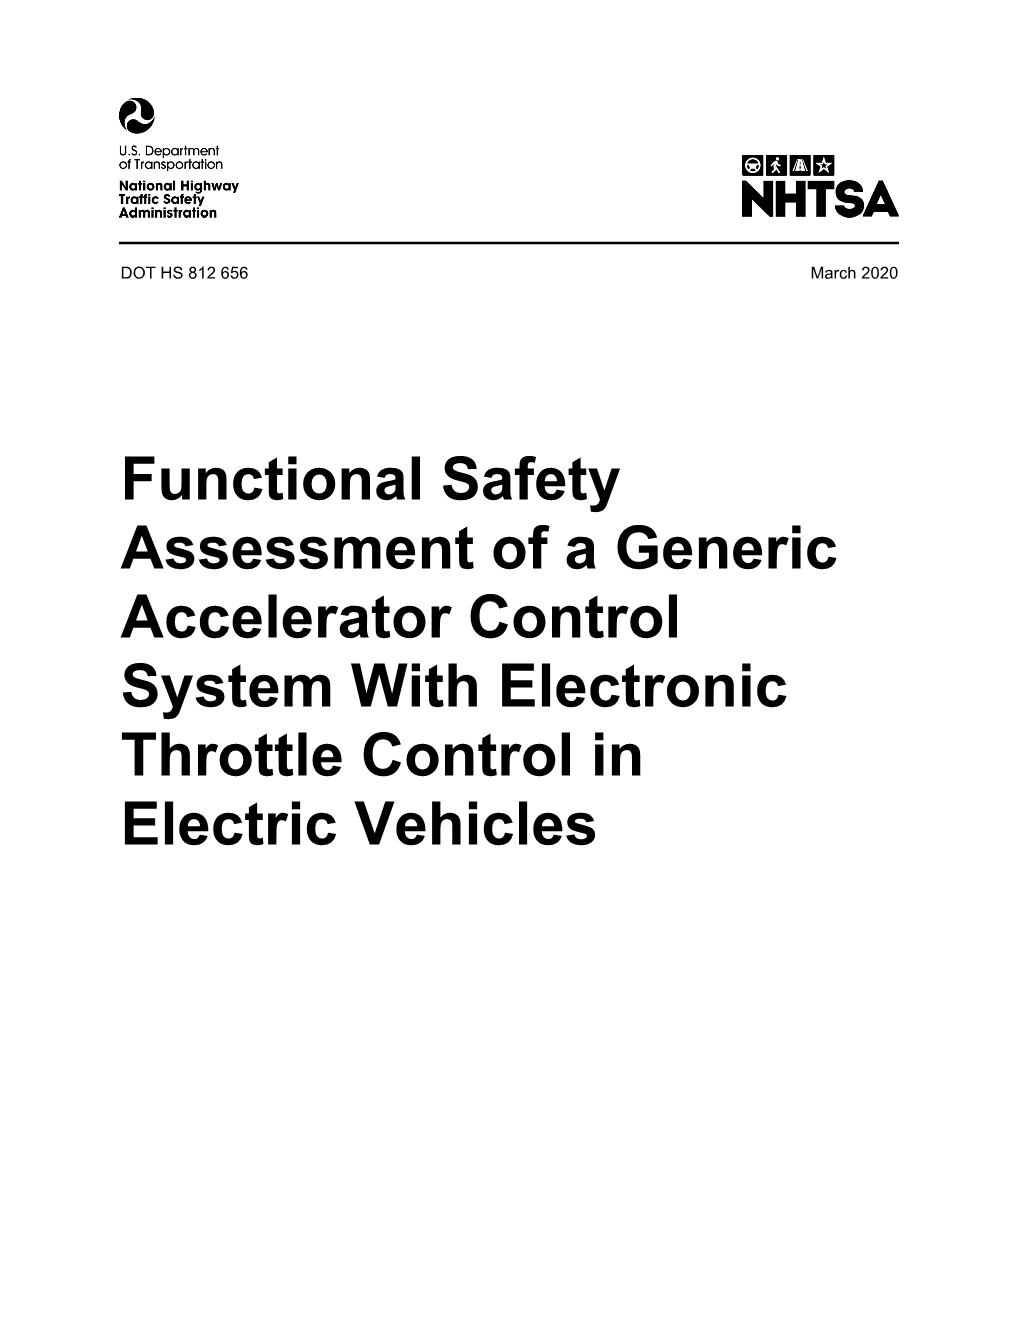 Functional Safety Assessment of a Generic Accelerator Control System with Electronic Throttle Control in Electric Vehicles DISCLAIMER